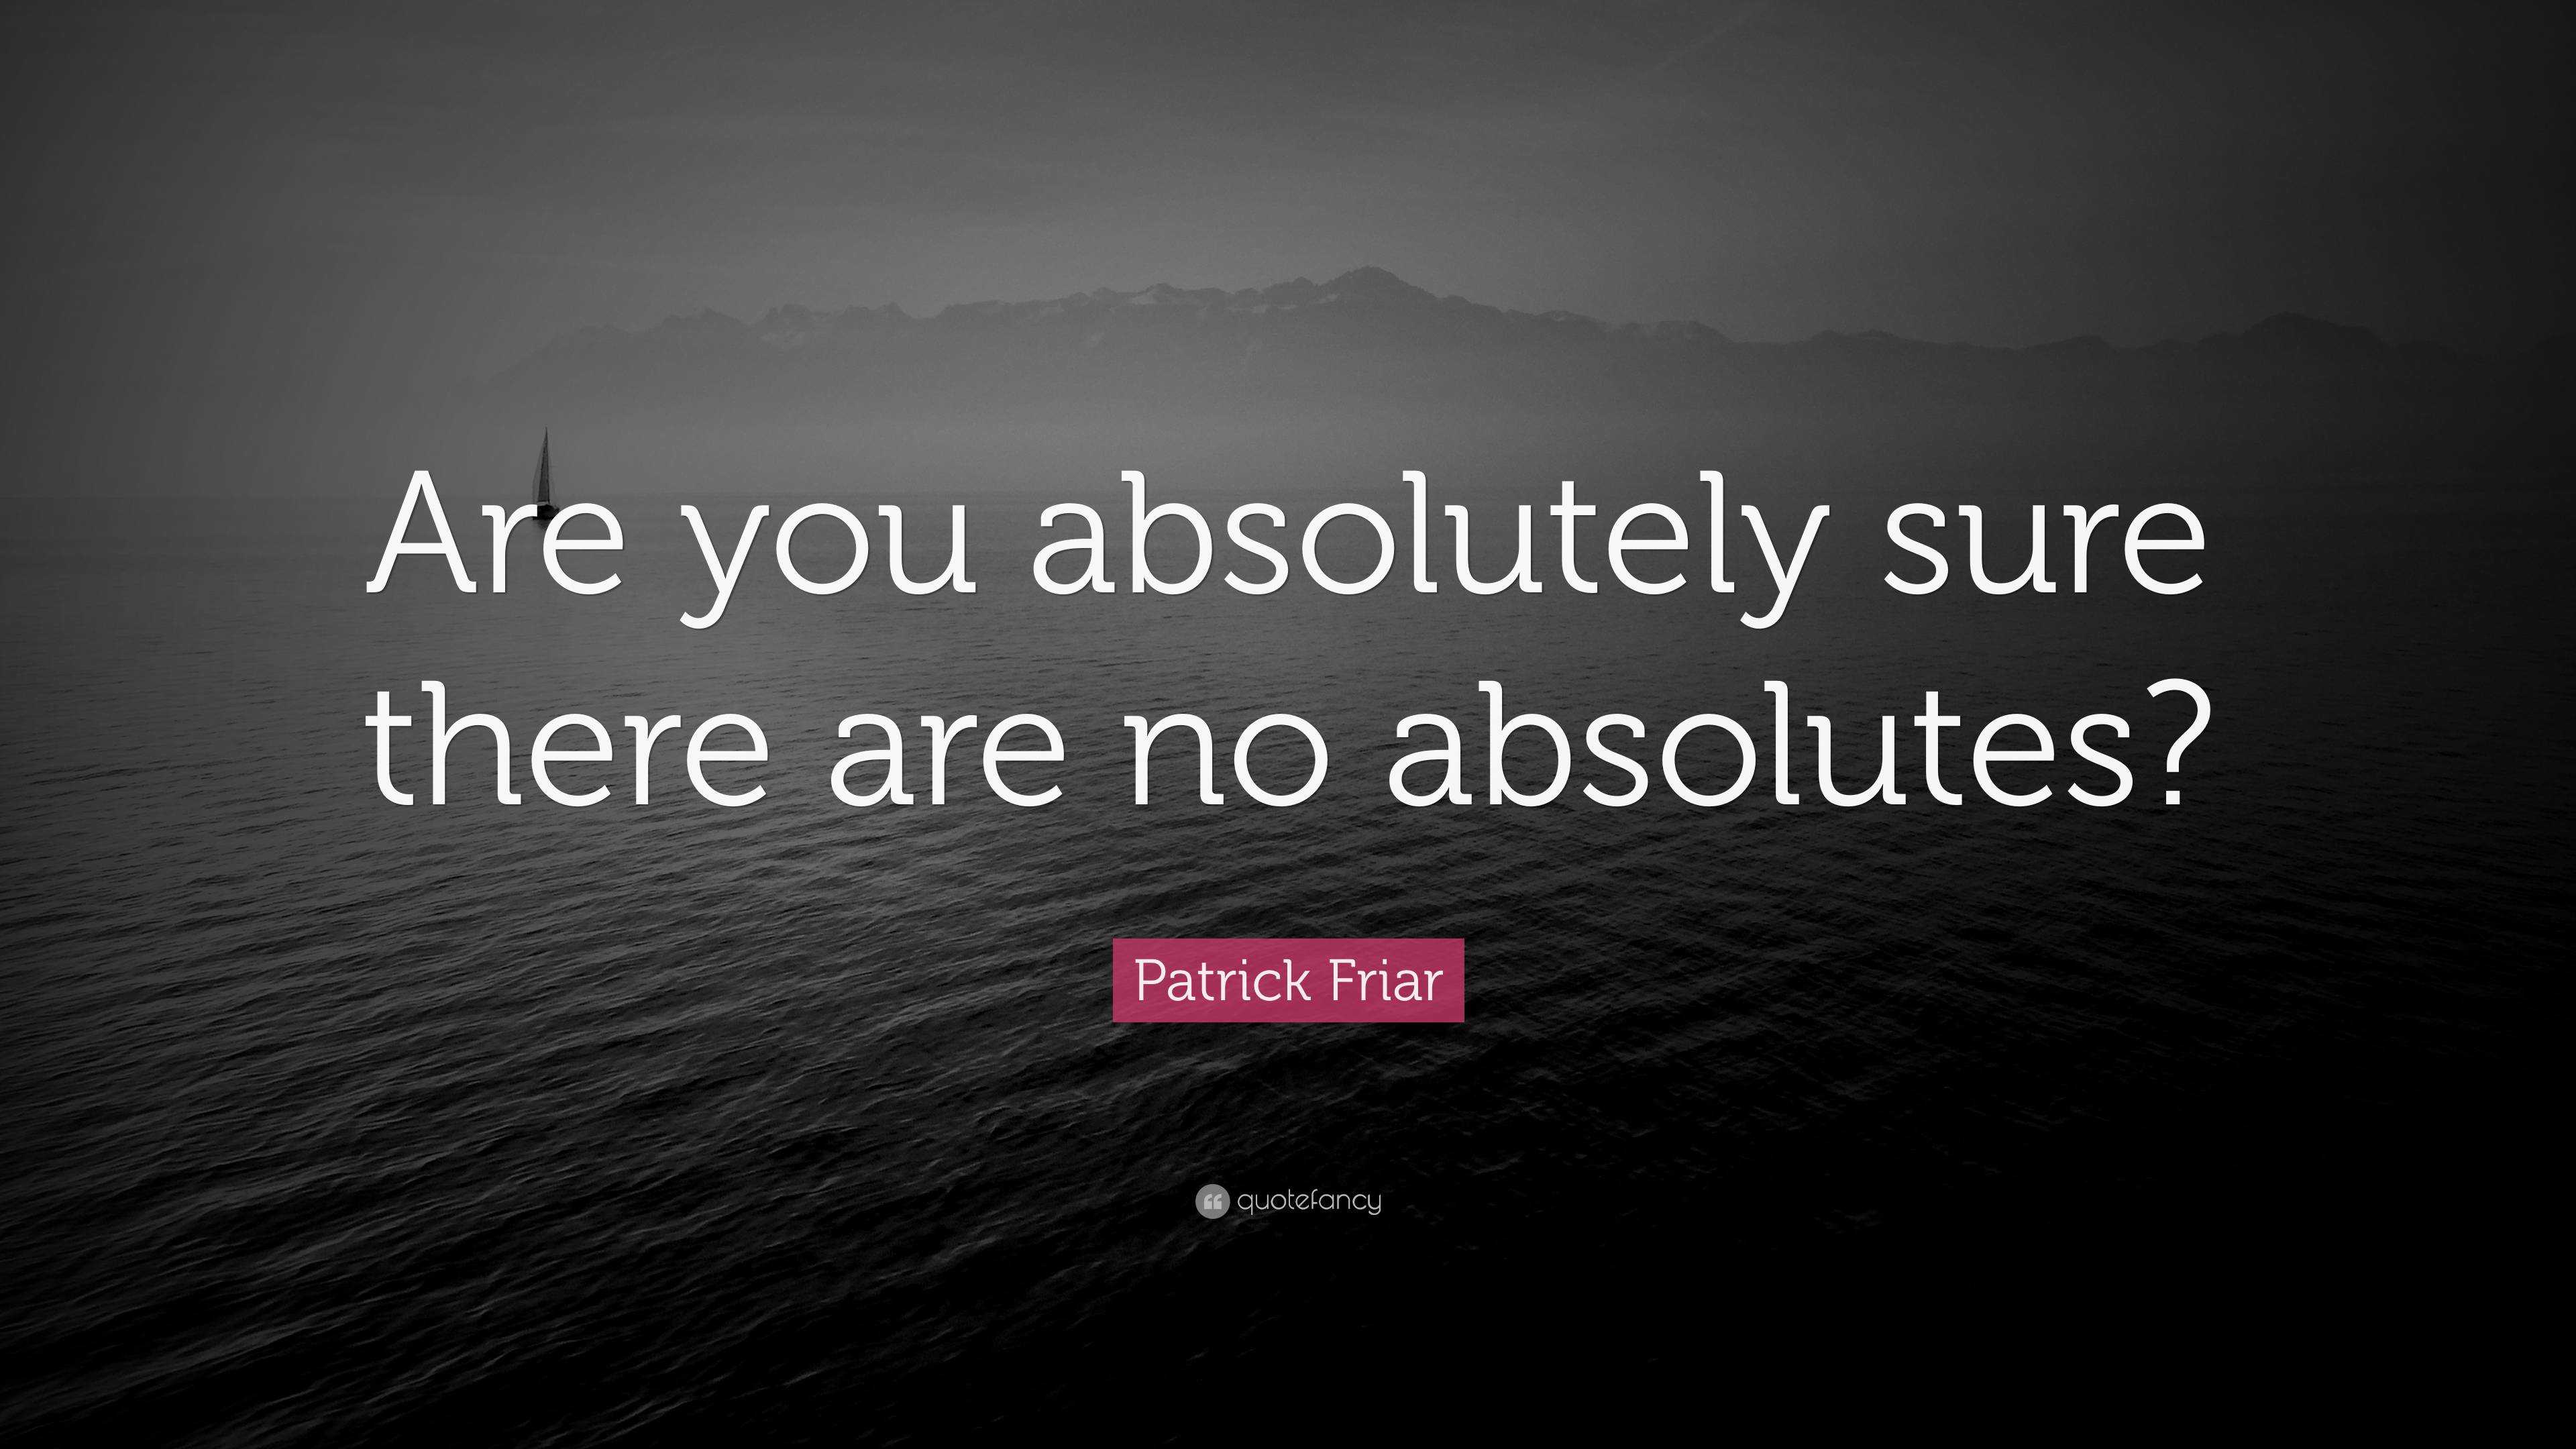 Patrick Friar Quote: “Are you absolutely sure there are no absolutes?”